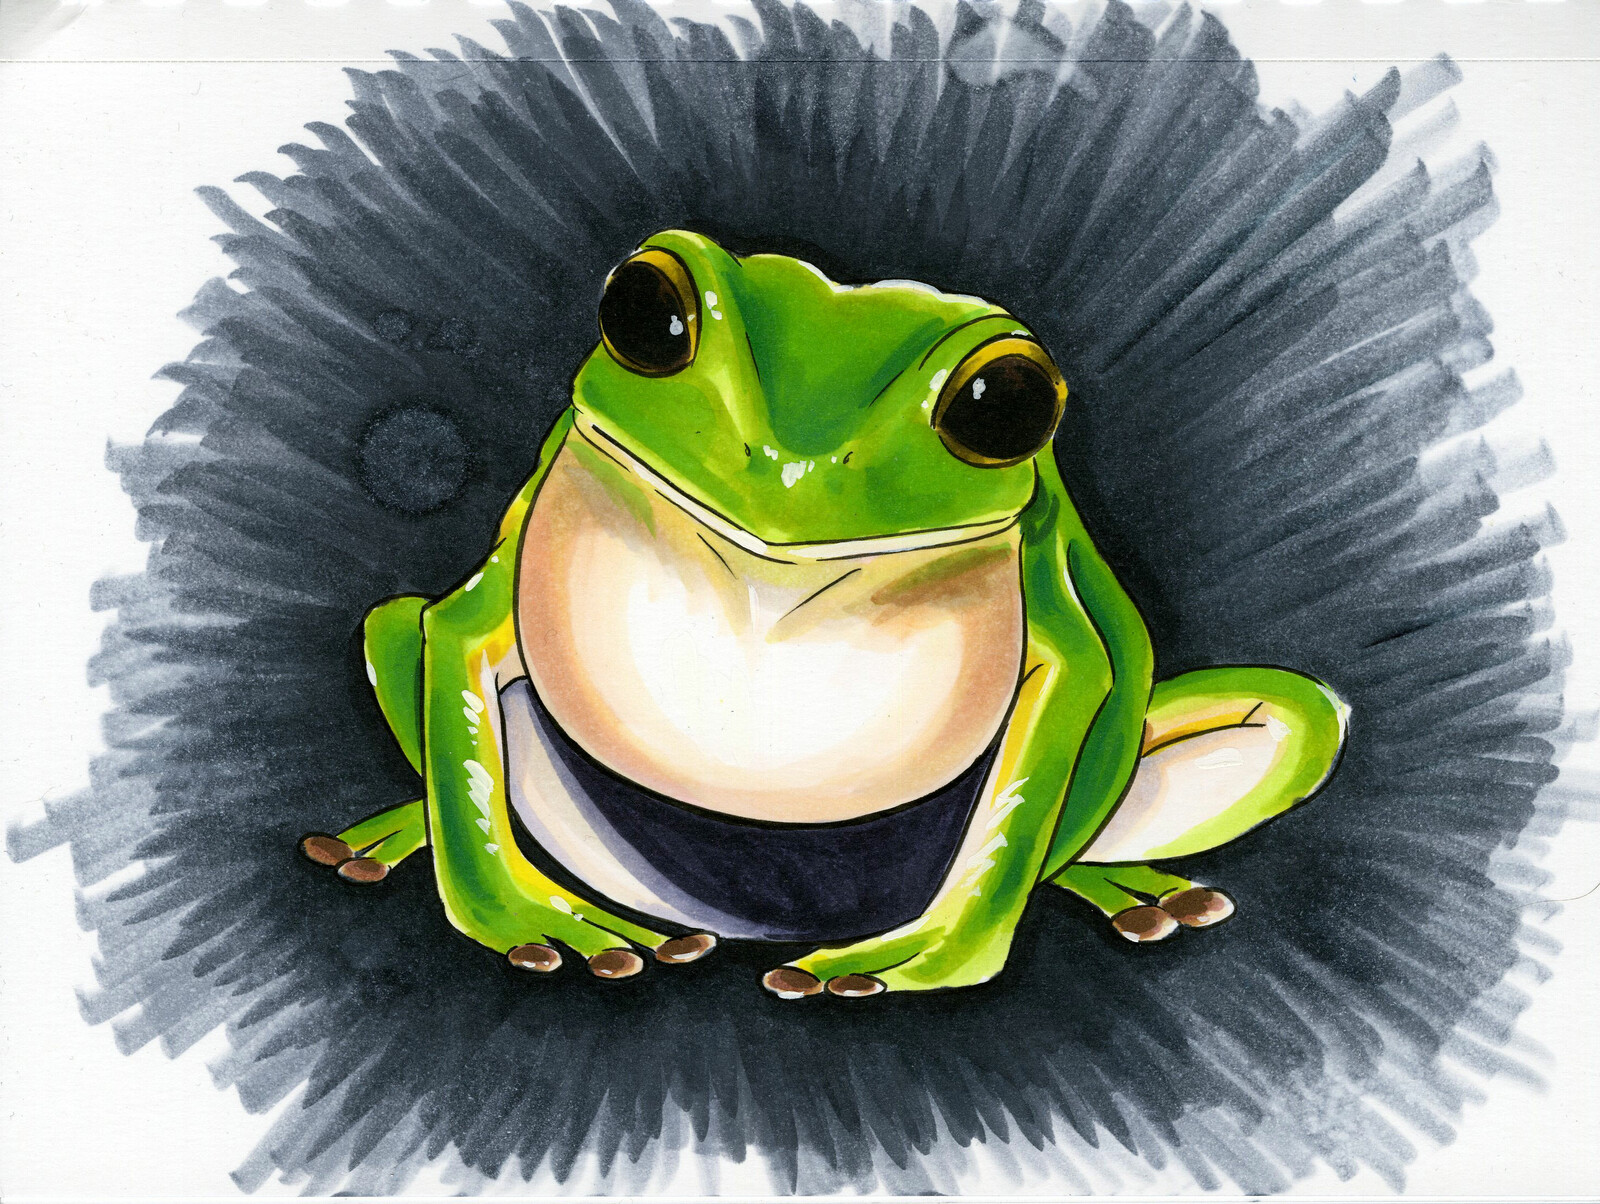 The completed frog illustration.